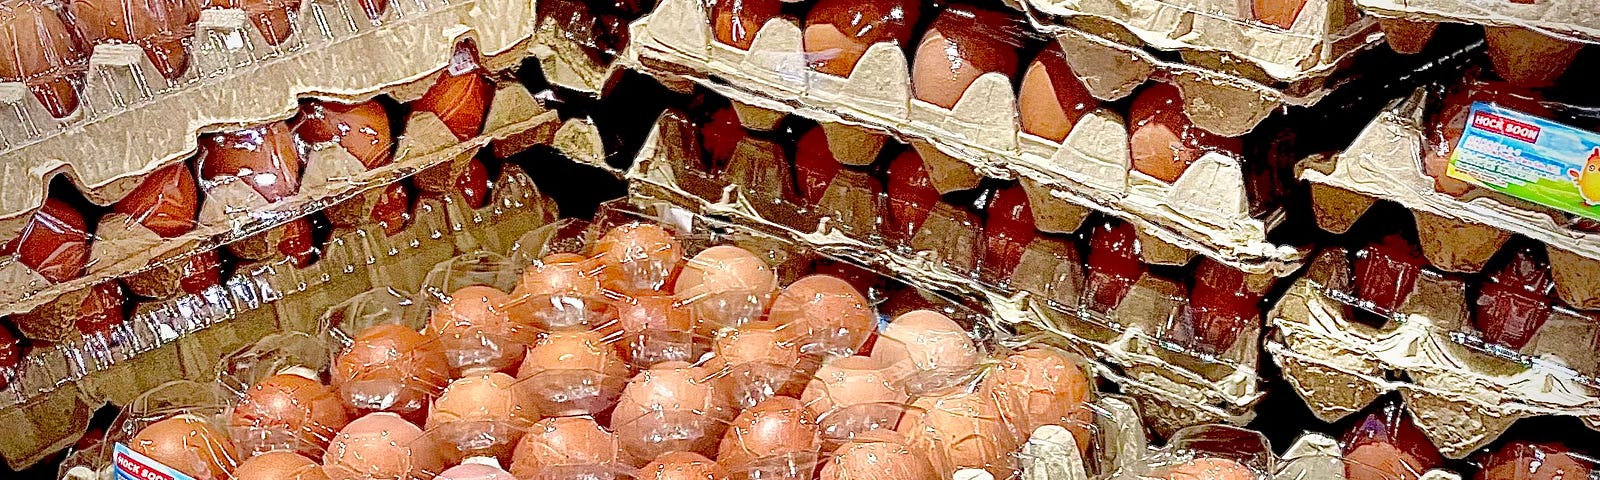 Cartons of eggs in a supermarket